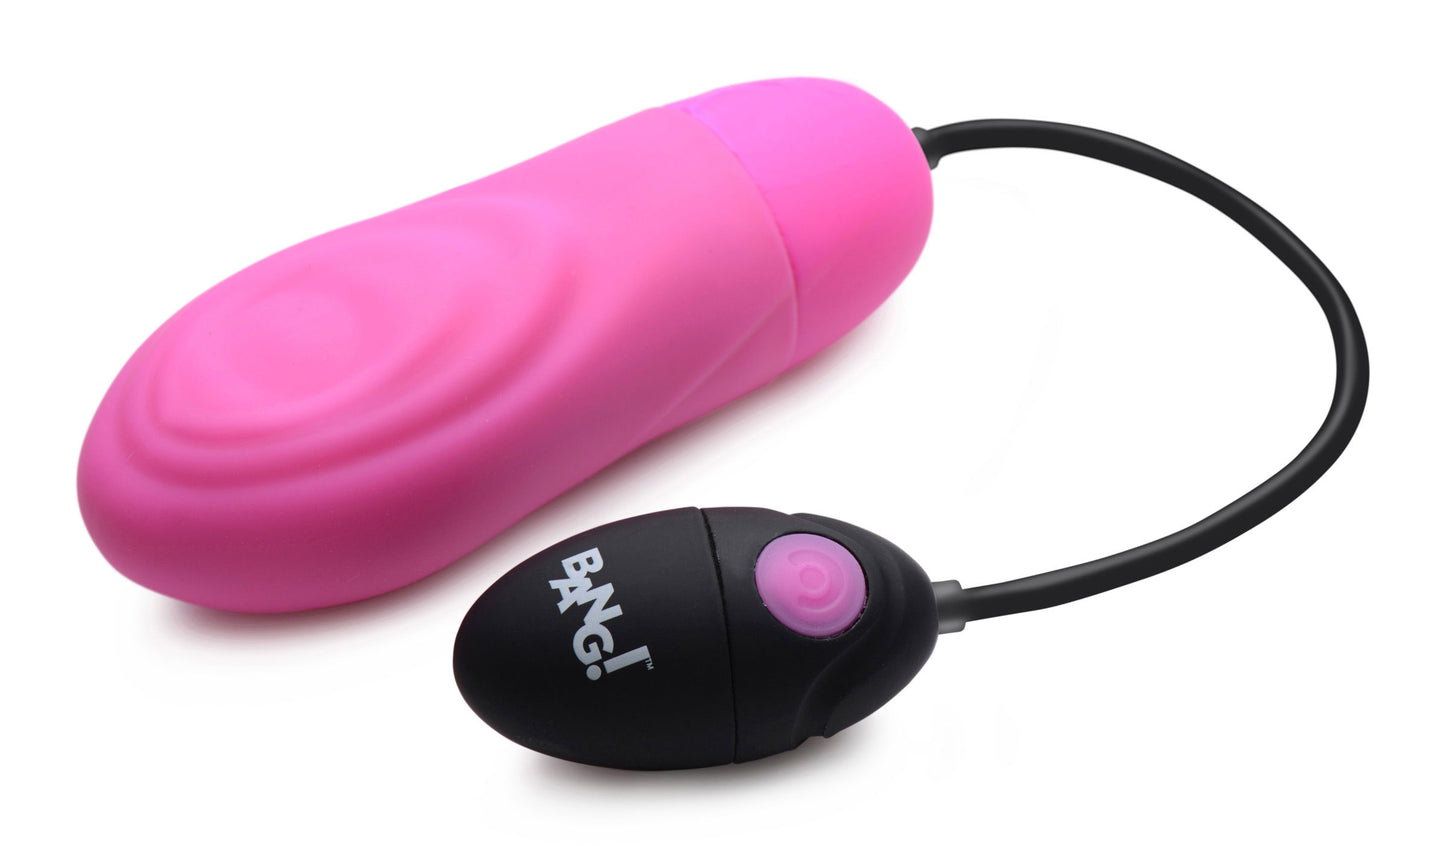 7x Pulsing Rechargeable Silicone Vibrator - Pink BNG-AG521-PNK